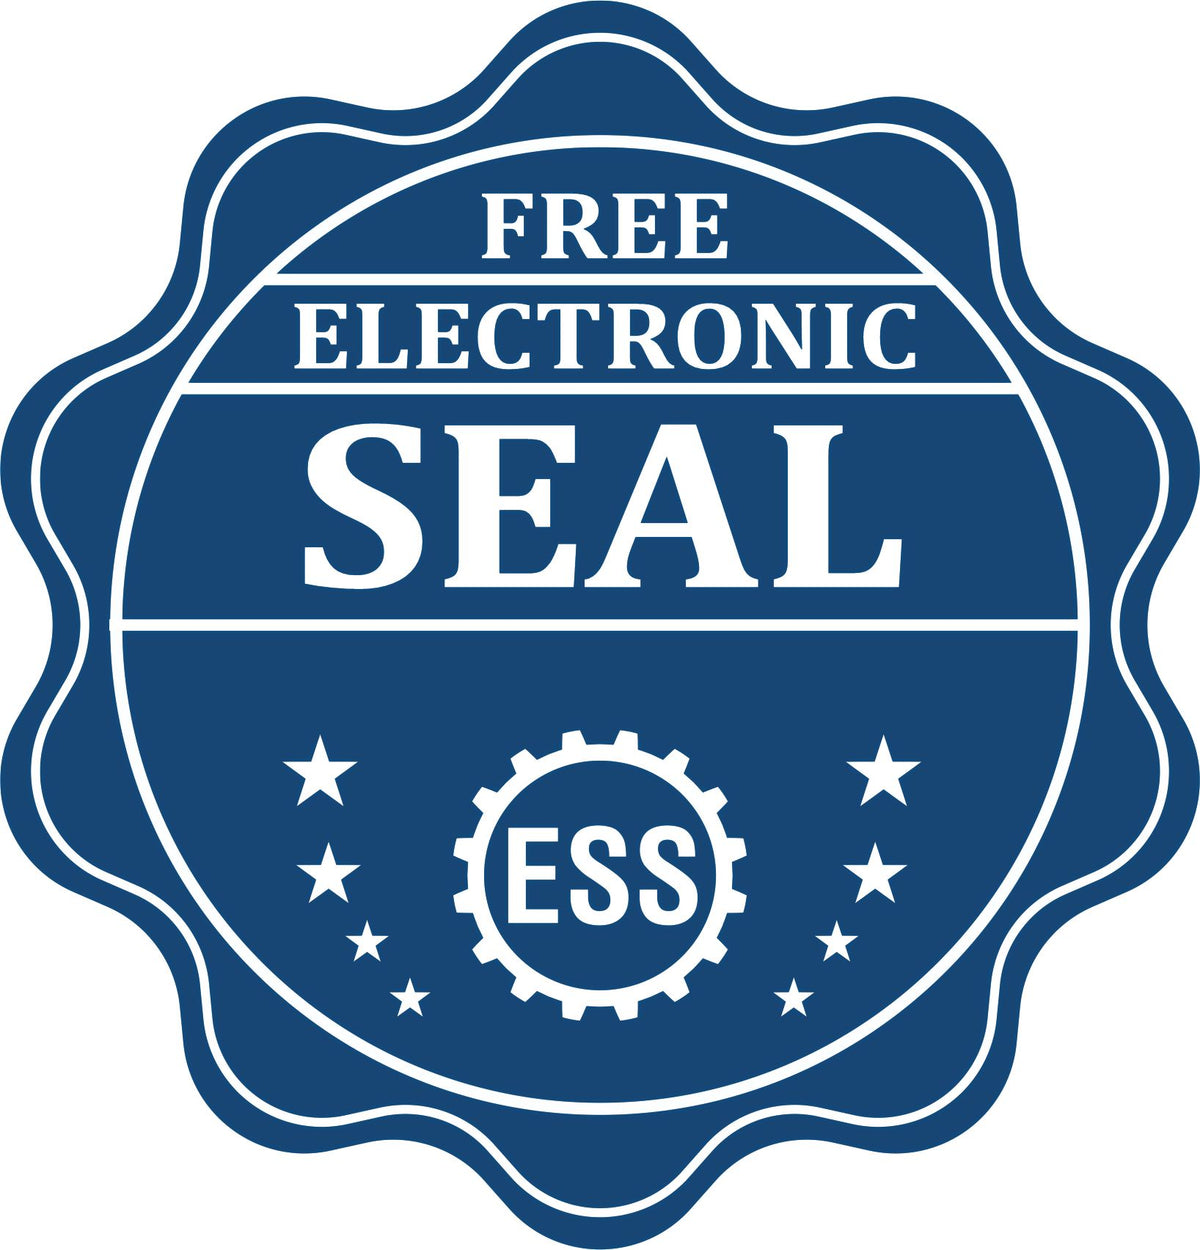 A badge showing a free electronic seal for the State of New Hampshire Extended Long Reach Geologist Seal with stars and the ESS gear on the emblem.